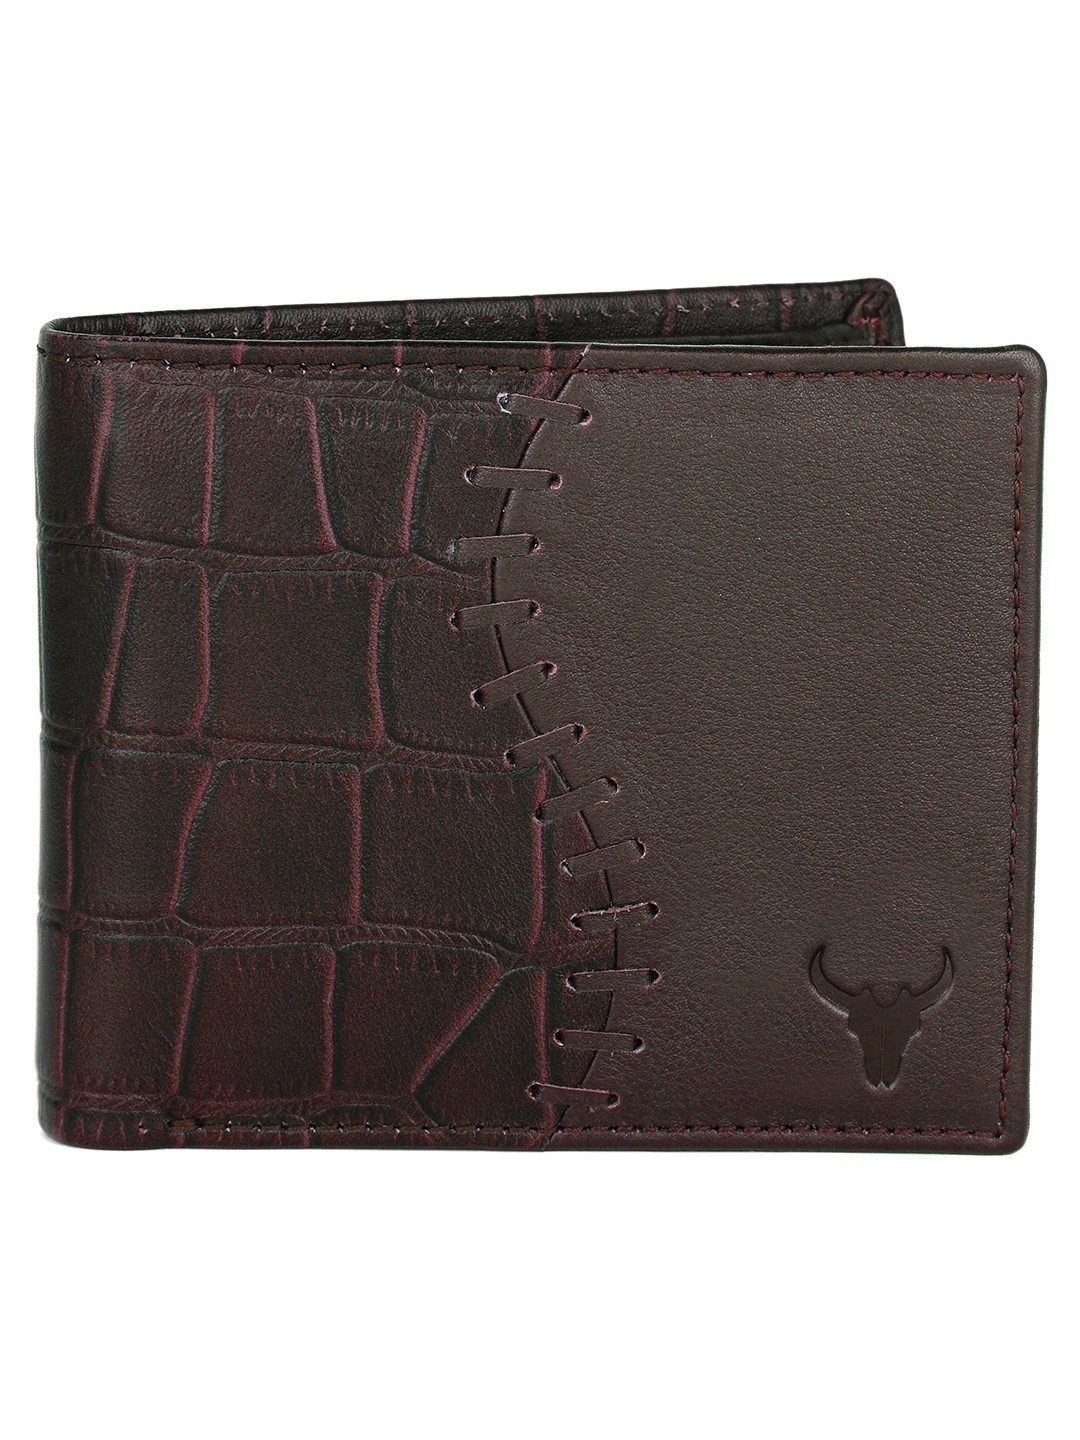 Napa Hide | Napa Hide RFID Protected Genuine High Quality Maroon Leather Wallet For Men